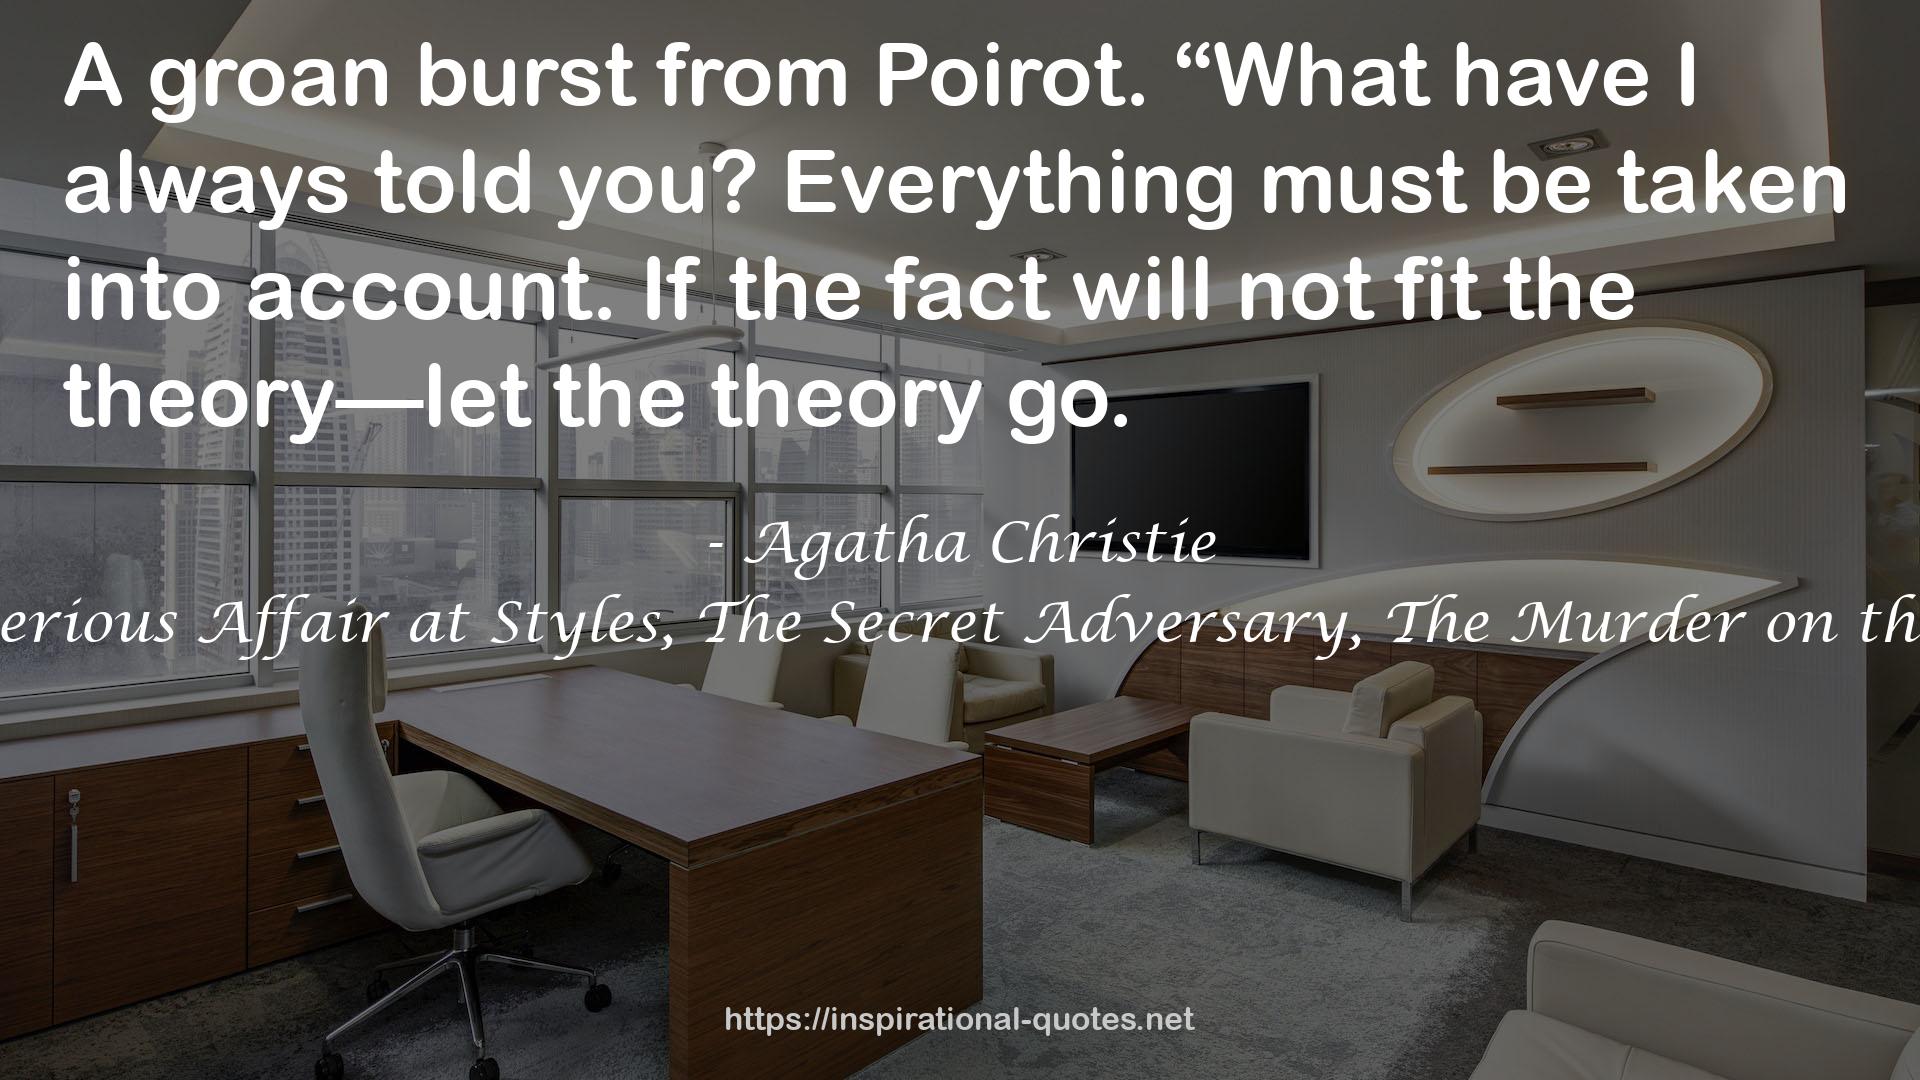 AGATHA CHRISTIE Premium Collection: The Mysterious Affair at Styles, The Secret Adversary, The Murder on the Links, The Cornish Mystery, Hercule Poirot's Cases QUOTES